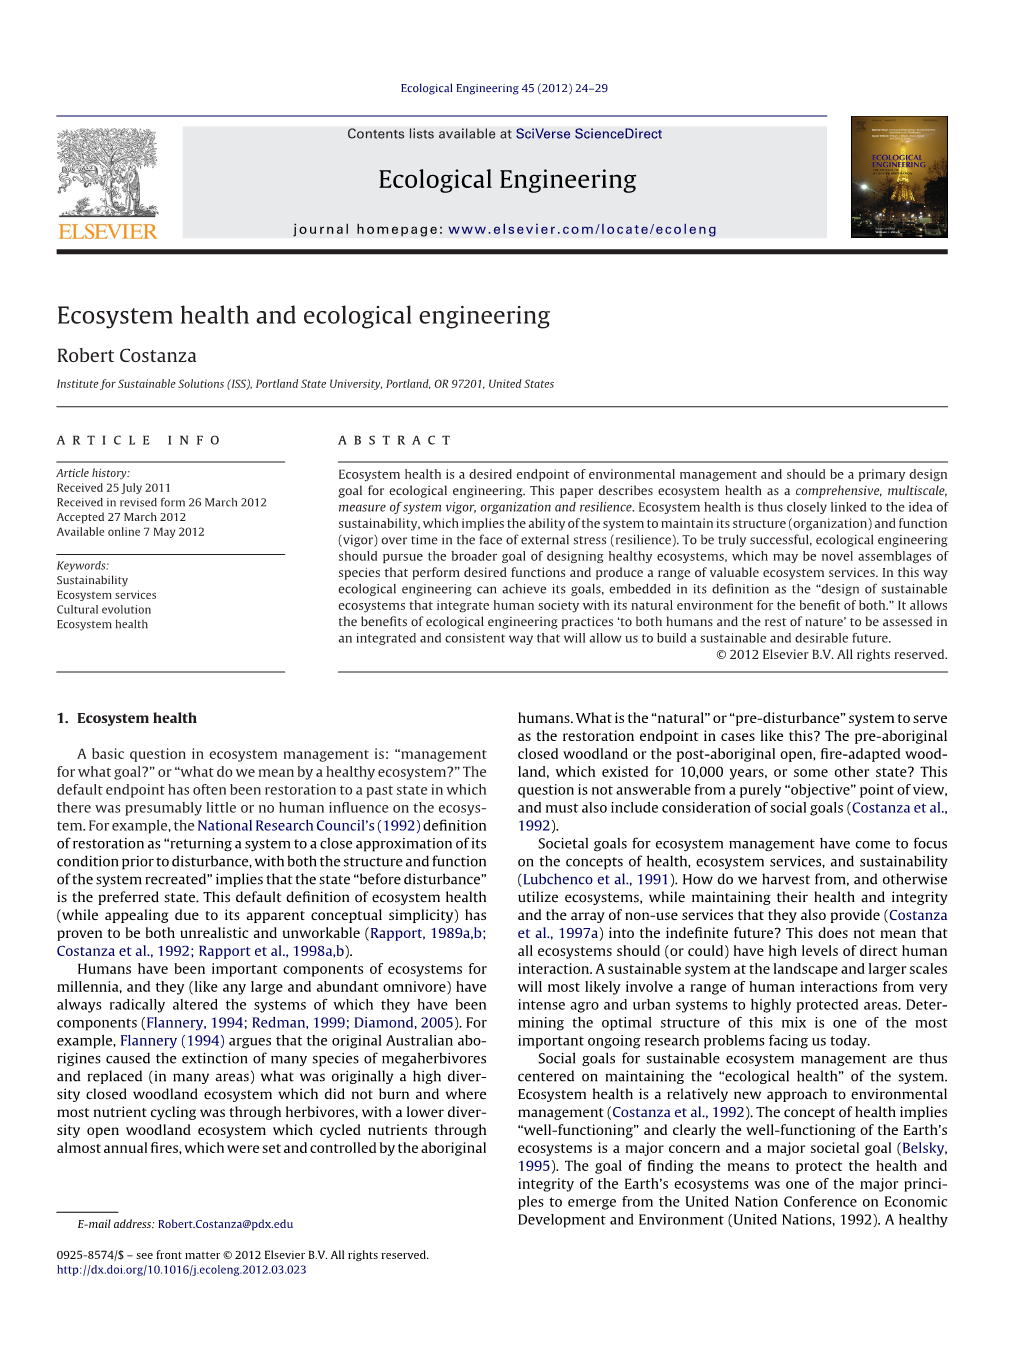 Ecosystem Health and Ecological Engineering